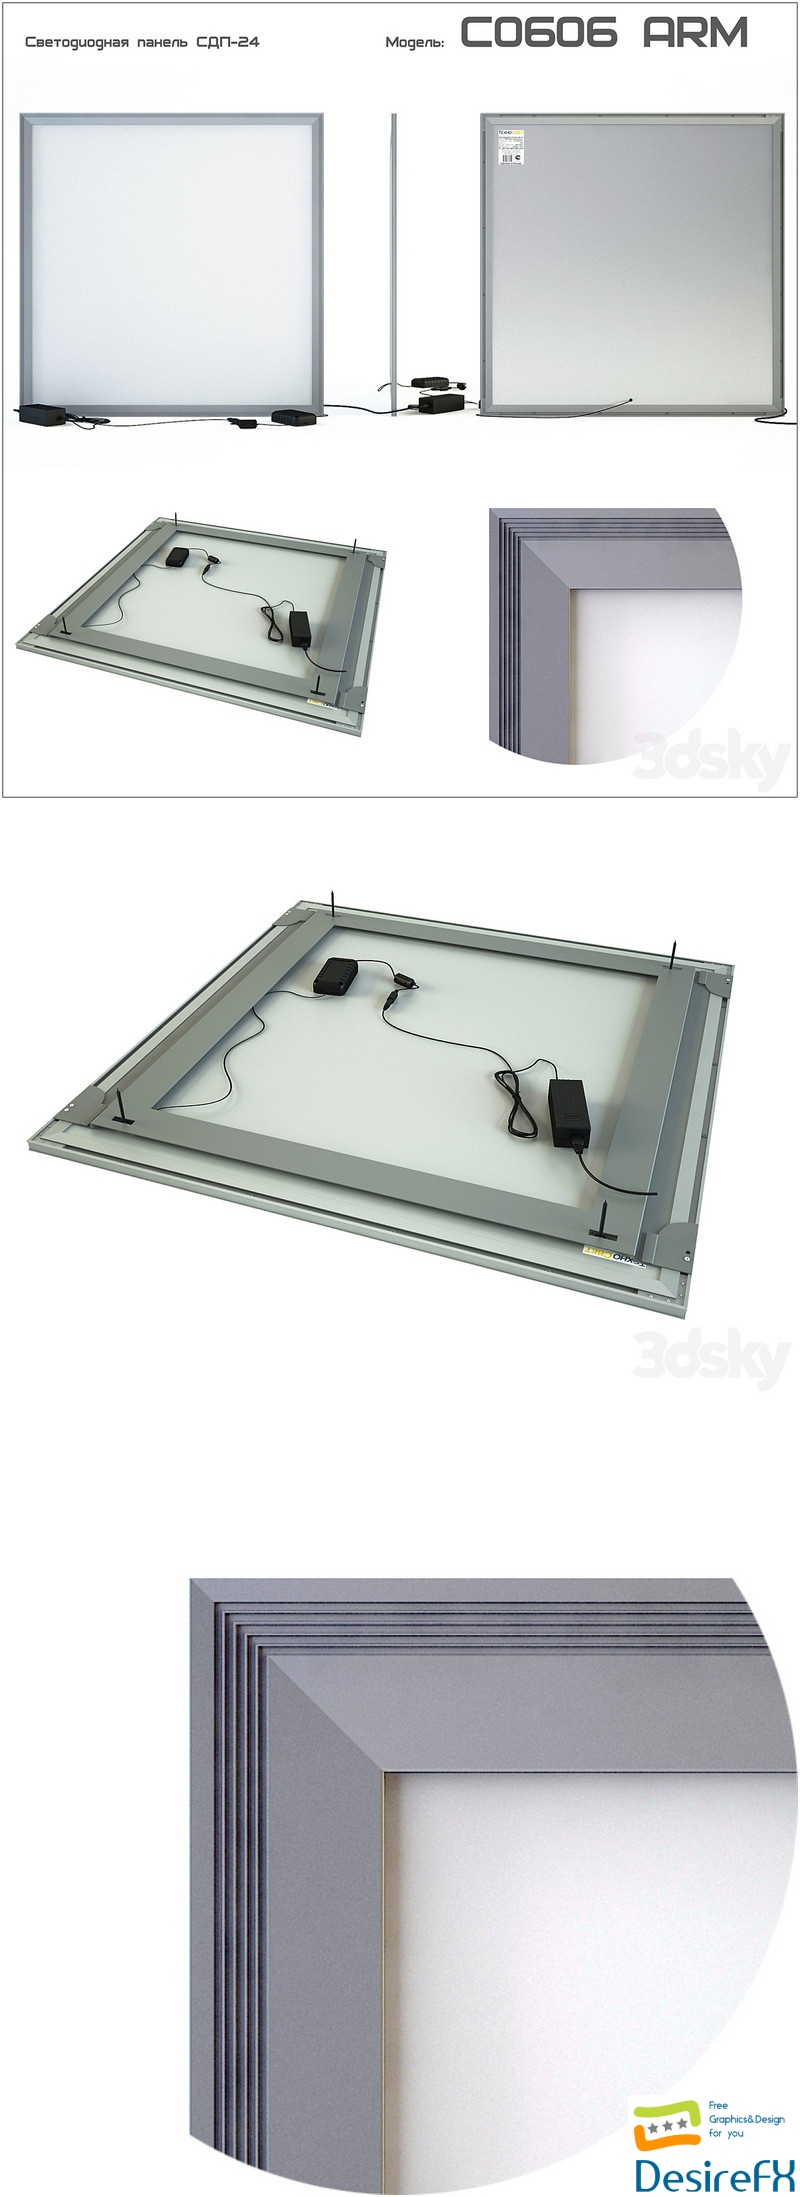 LED panel PSD-24 (C0606-ARM) with fastening in suspended ceiling 3D Model